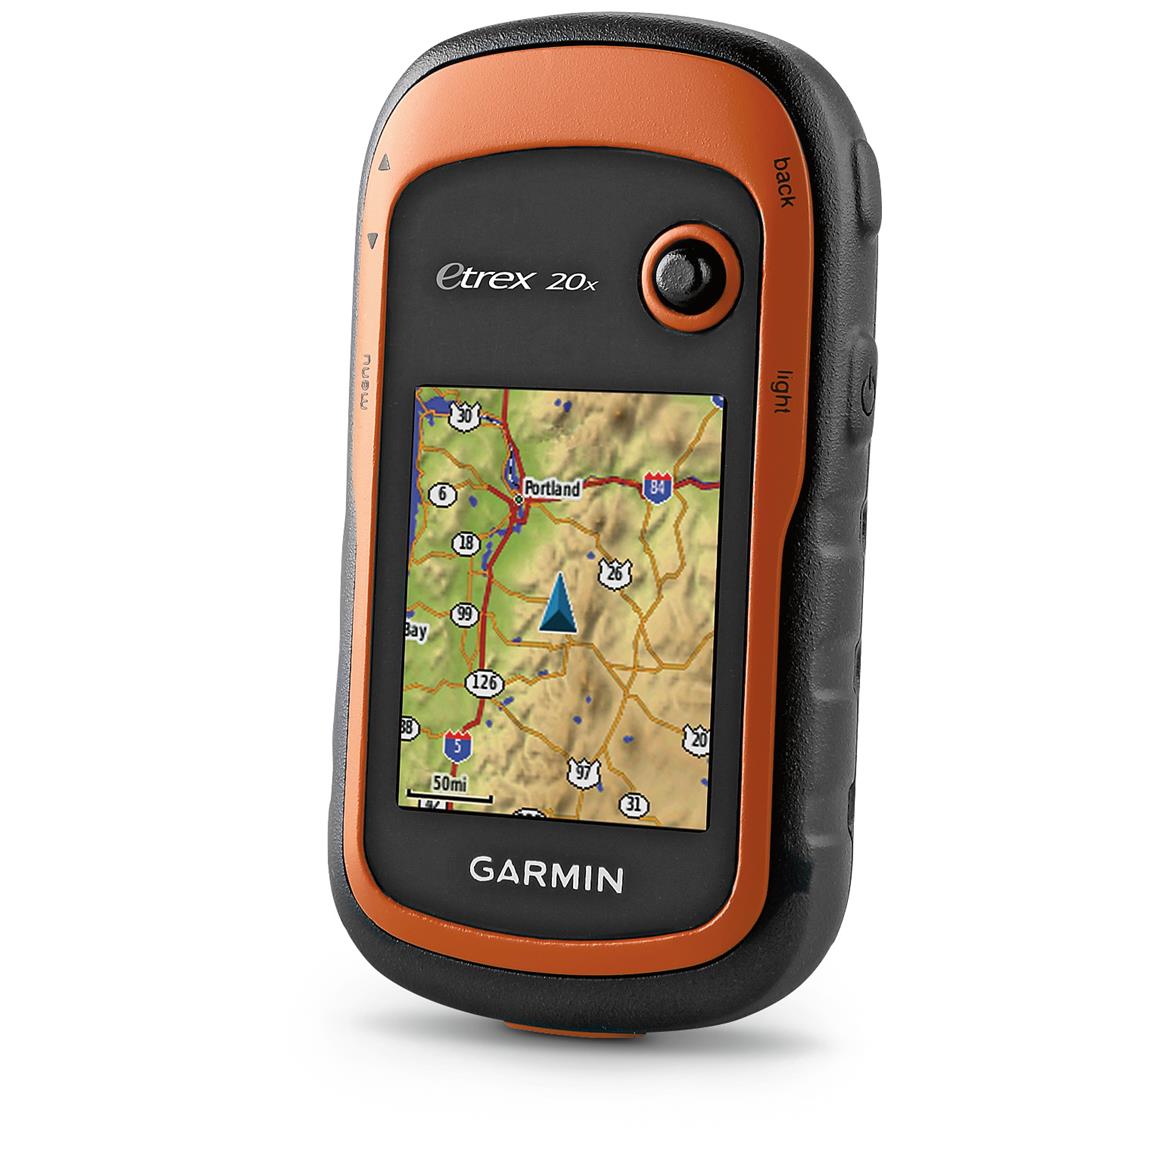 Which portable GPS is best?